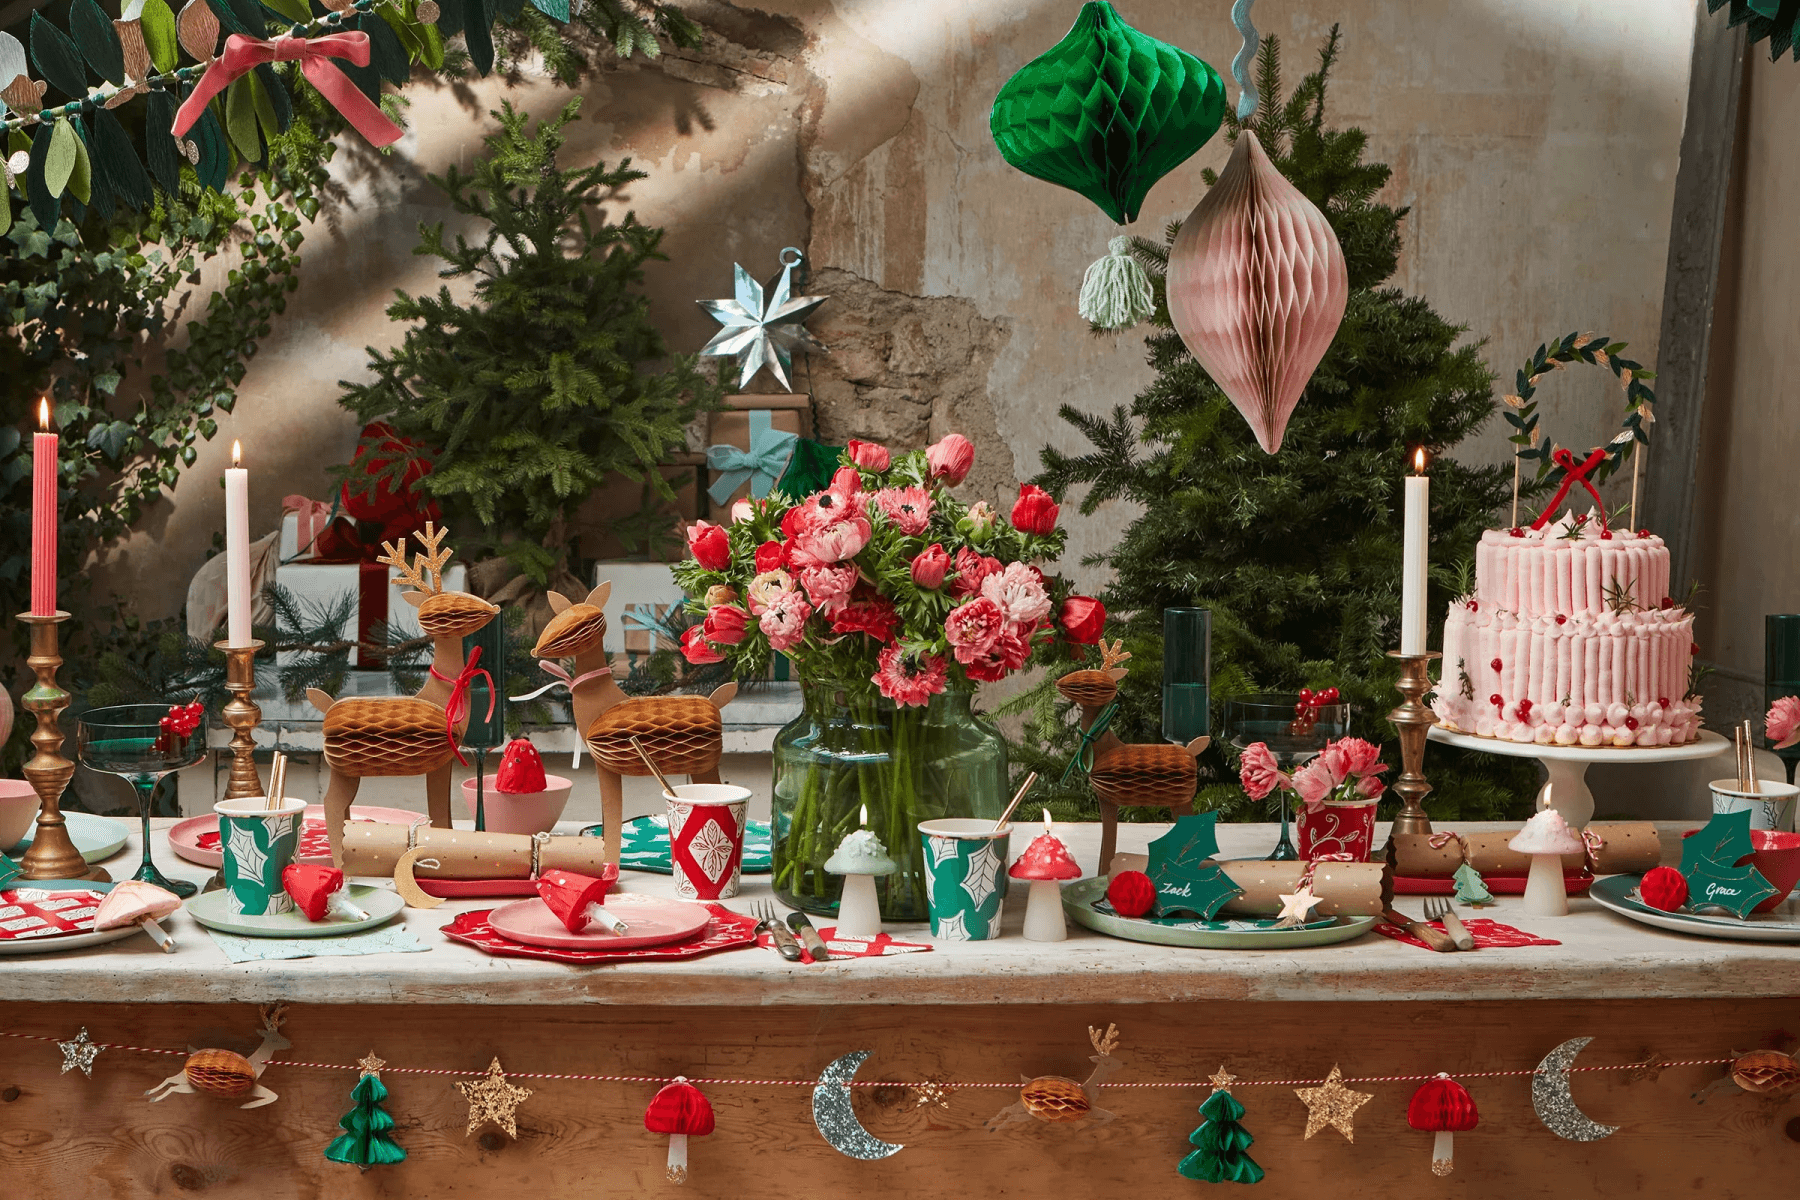 A wooden table is covered in airy Christmas décor like honeycomb items, novelty and taper candles, small evergreen trees, a pink cake, and felt holly.